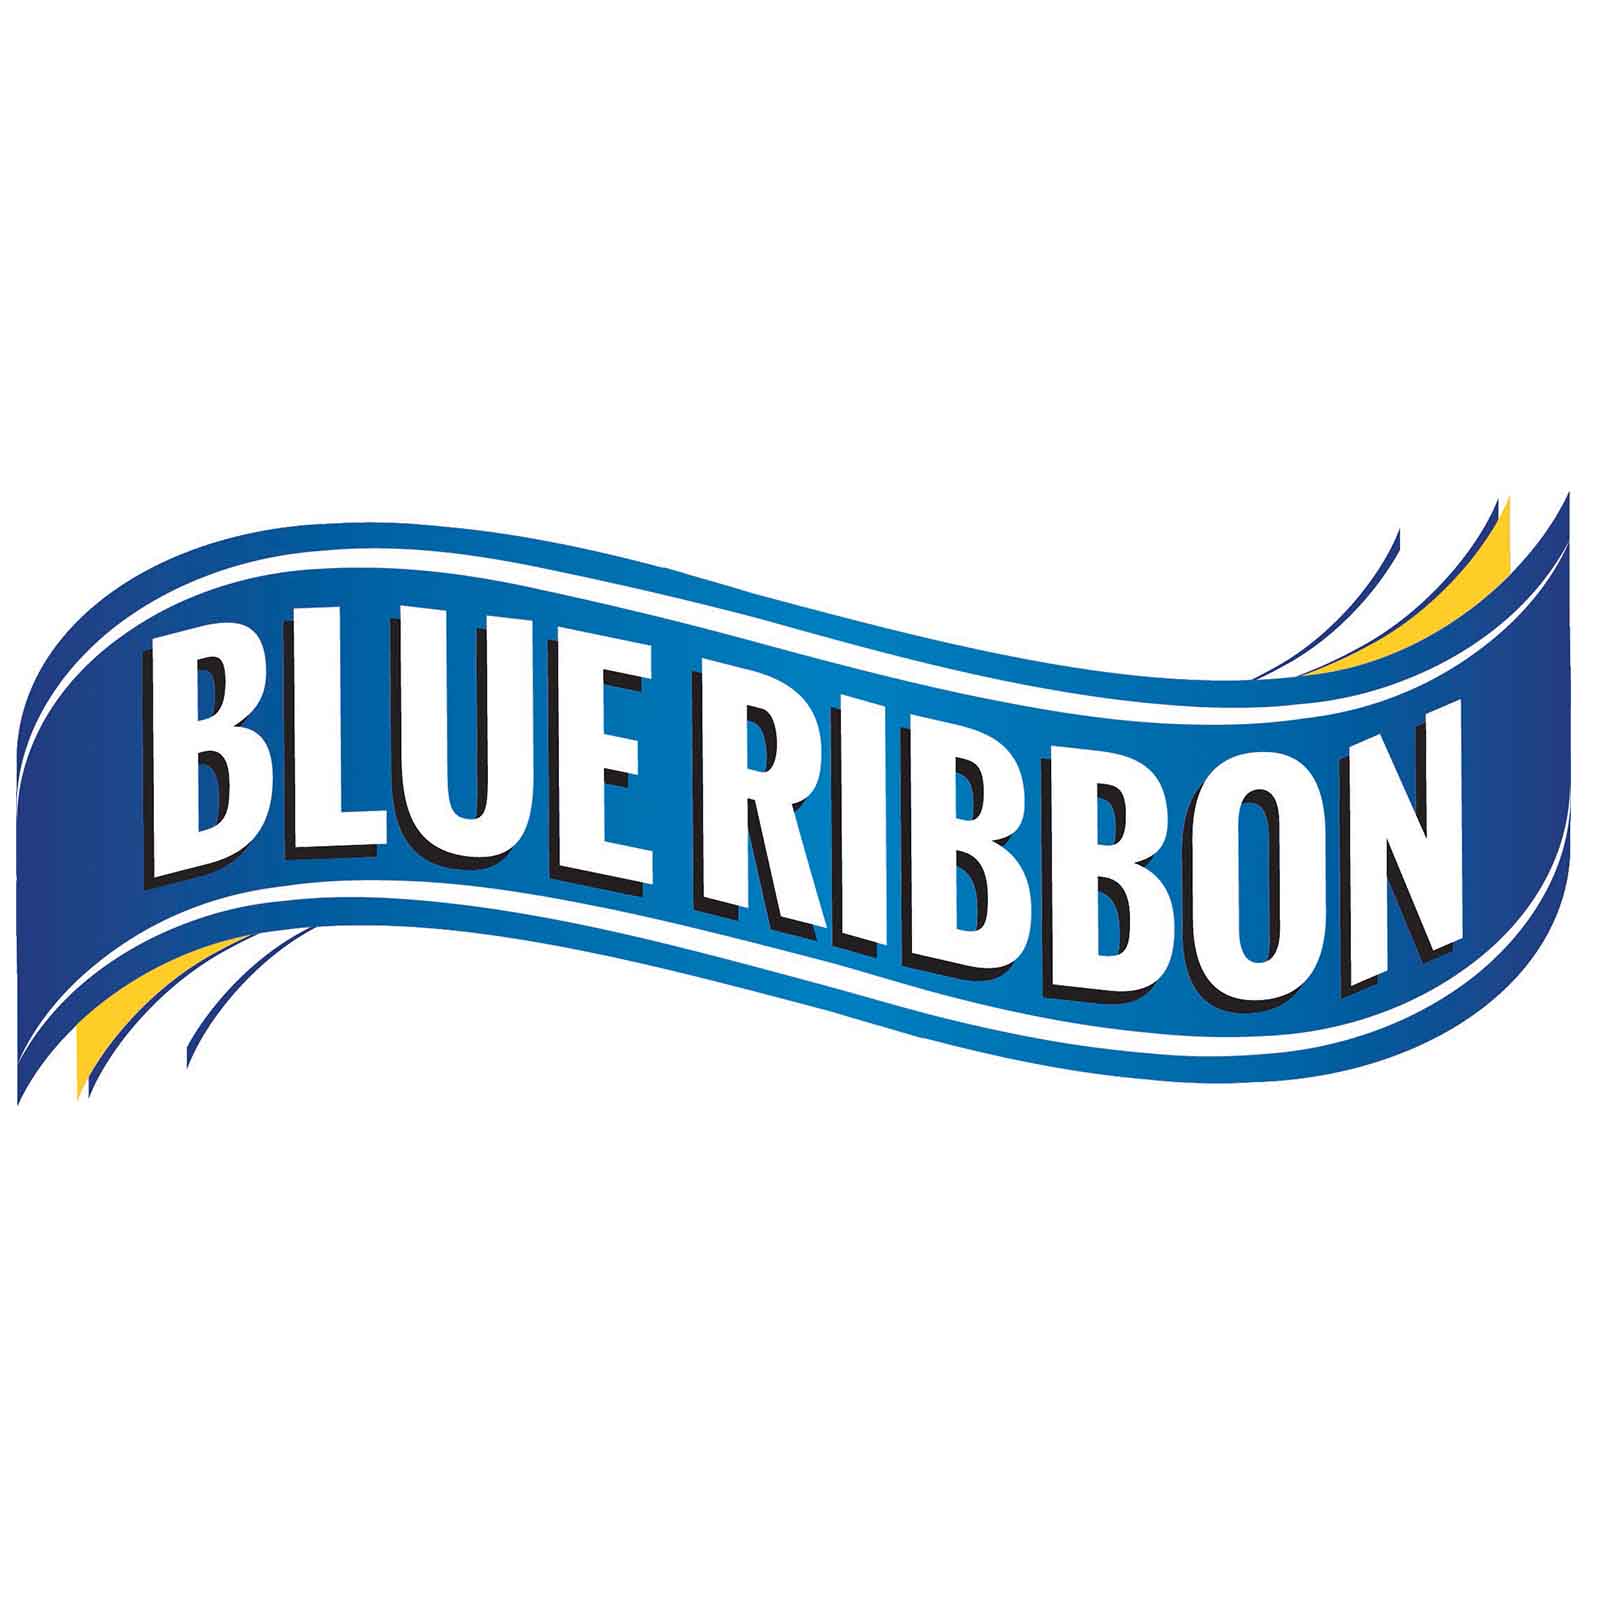 blue, white and yellow logo for the blue ribbon bread brand of south Africa who will sponsor one of the most fun Team building activities in cape town